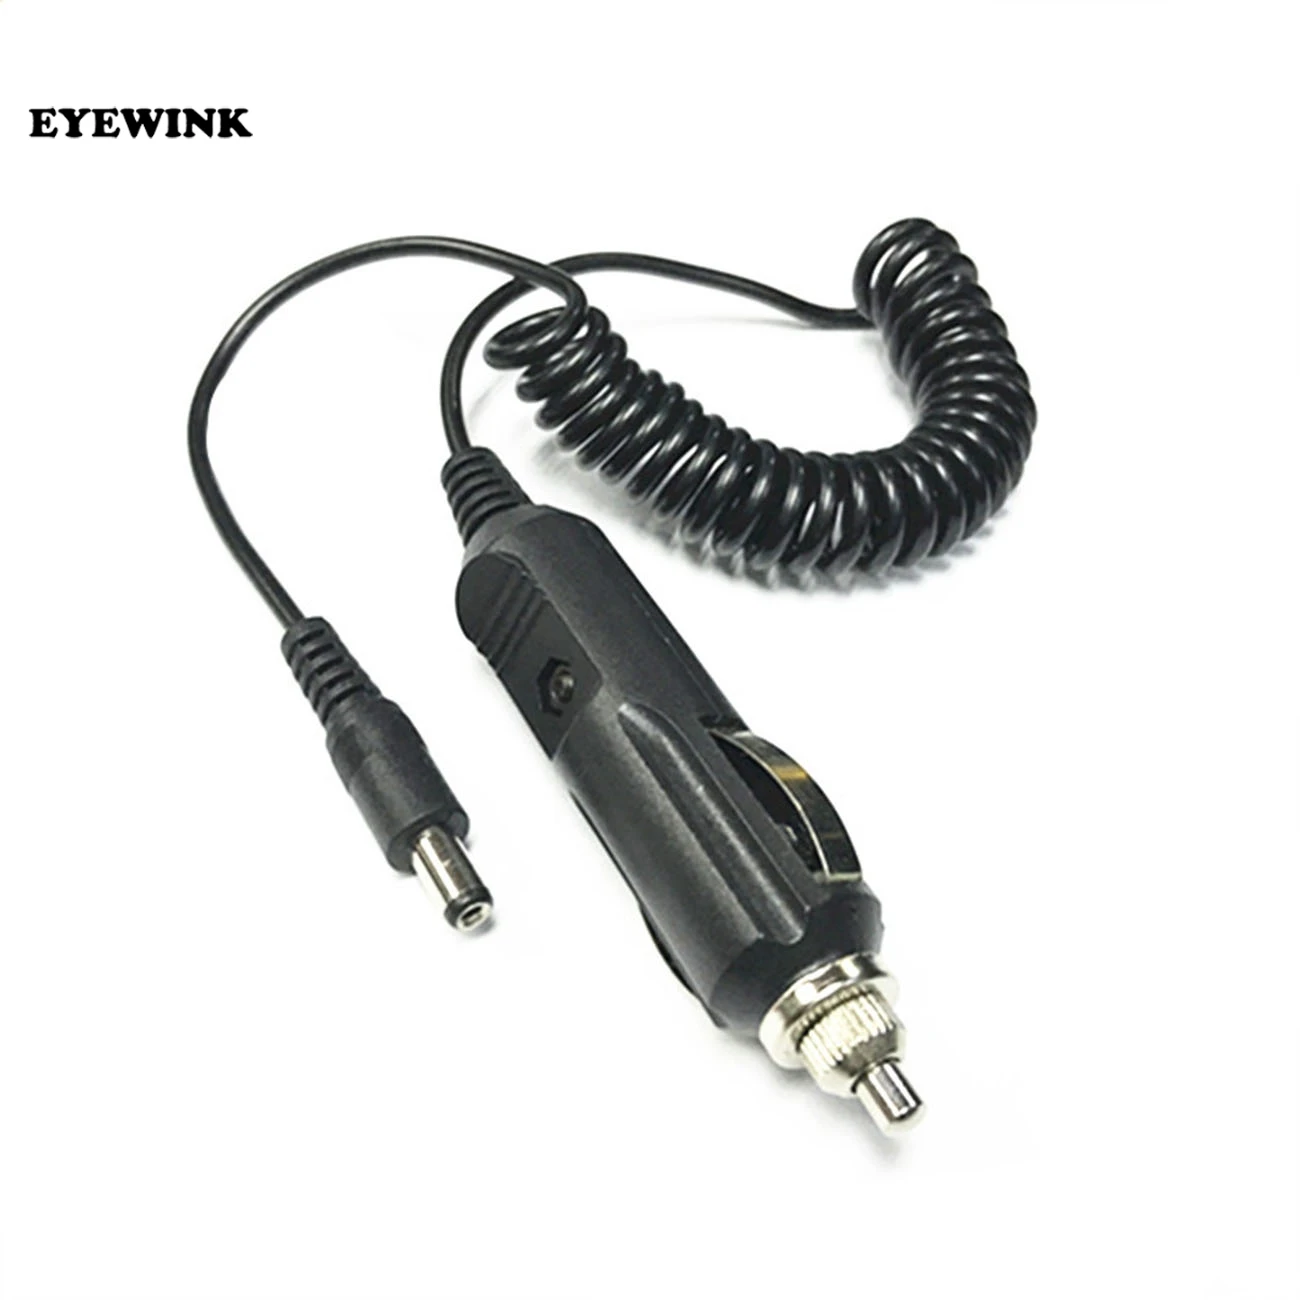 

24V 12V General Car Cigarette Lighter Plug to DC5.5X2.1MM Car Charger Spring Power Cord Extension Cable 1.2m